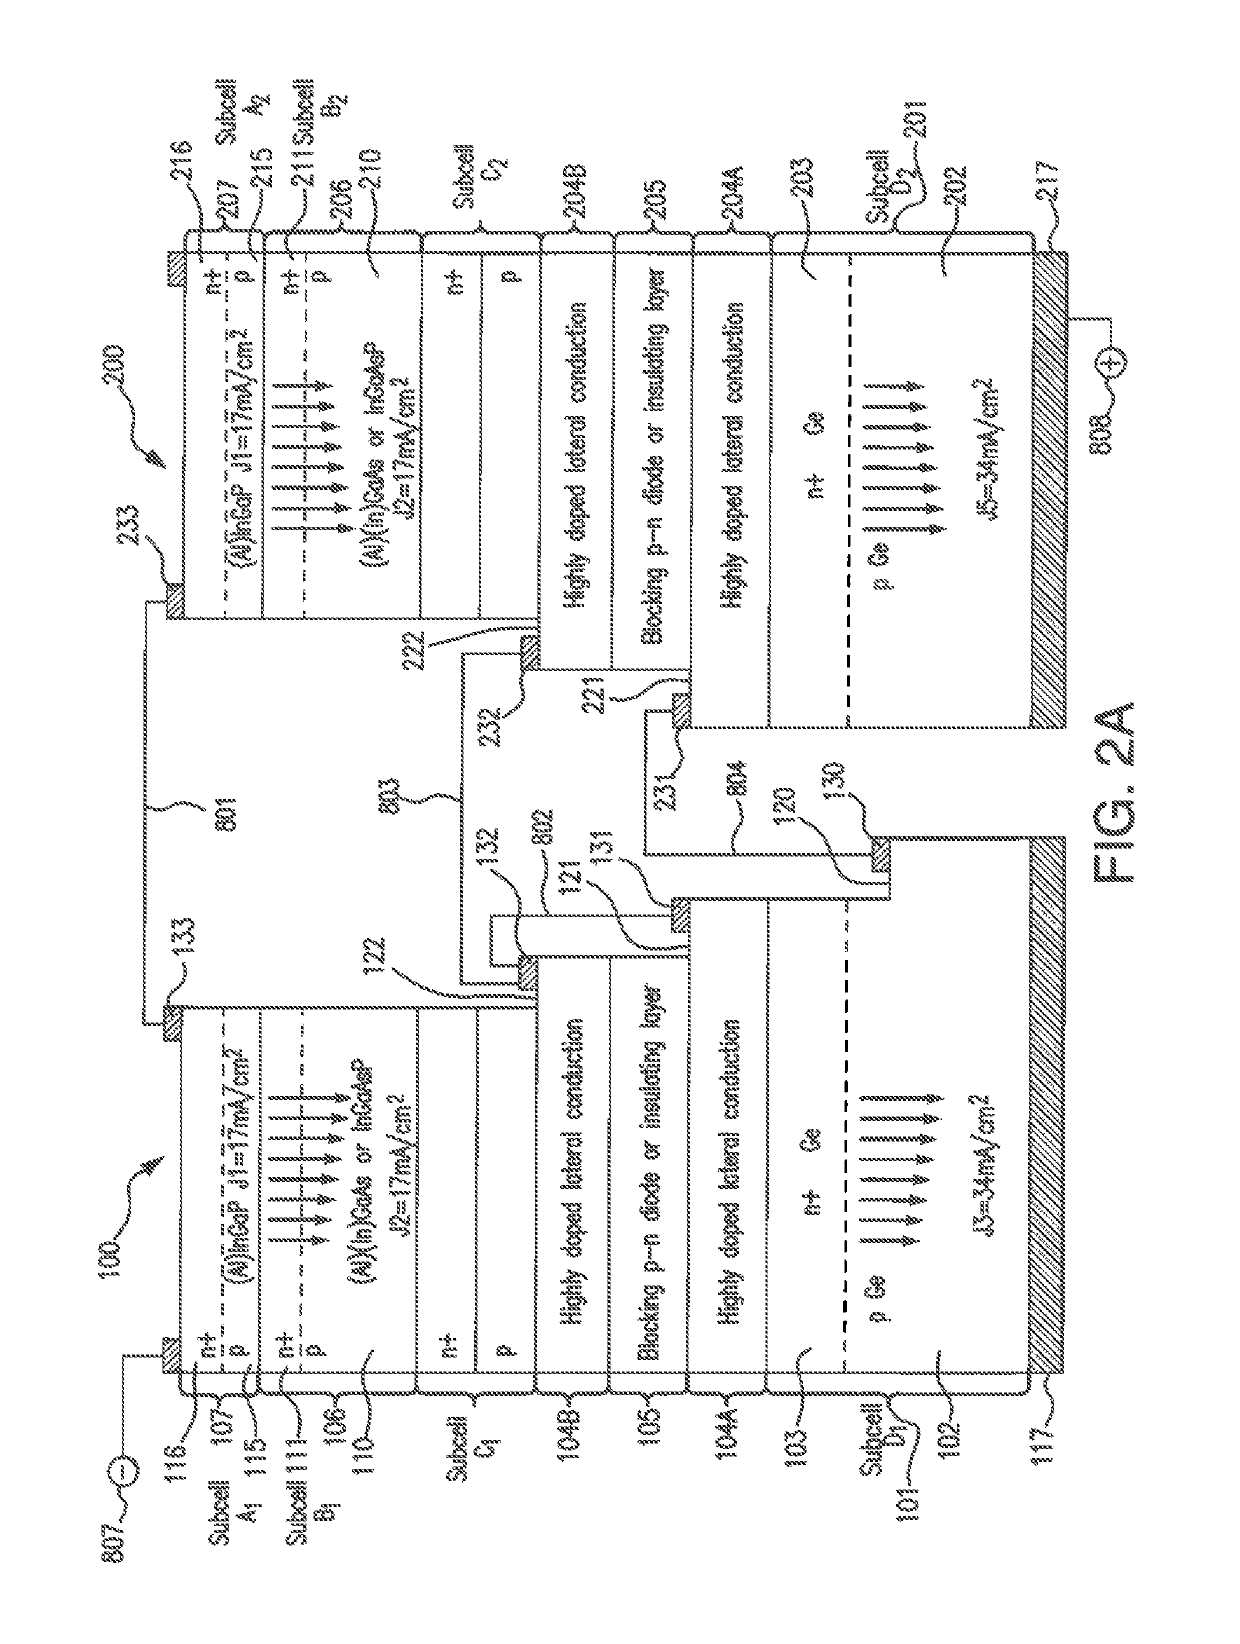 Multijunction solar cell assembly for space applications